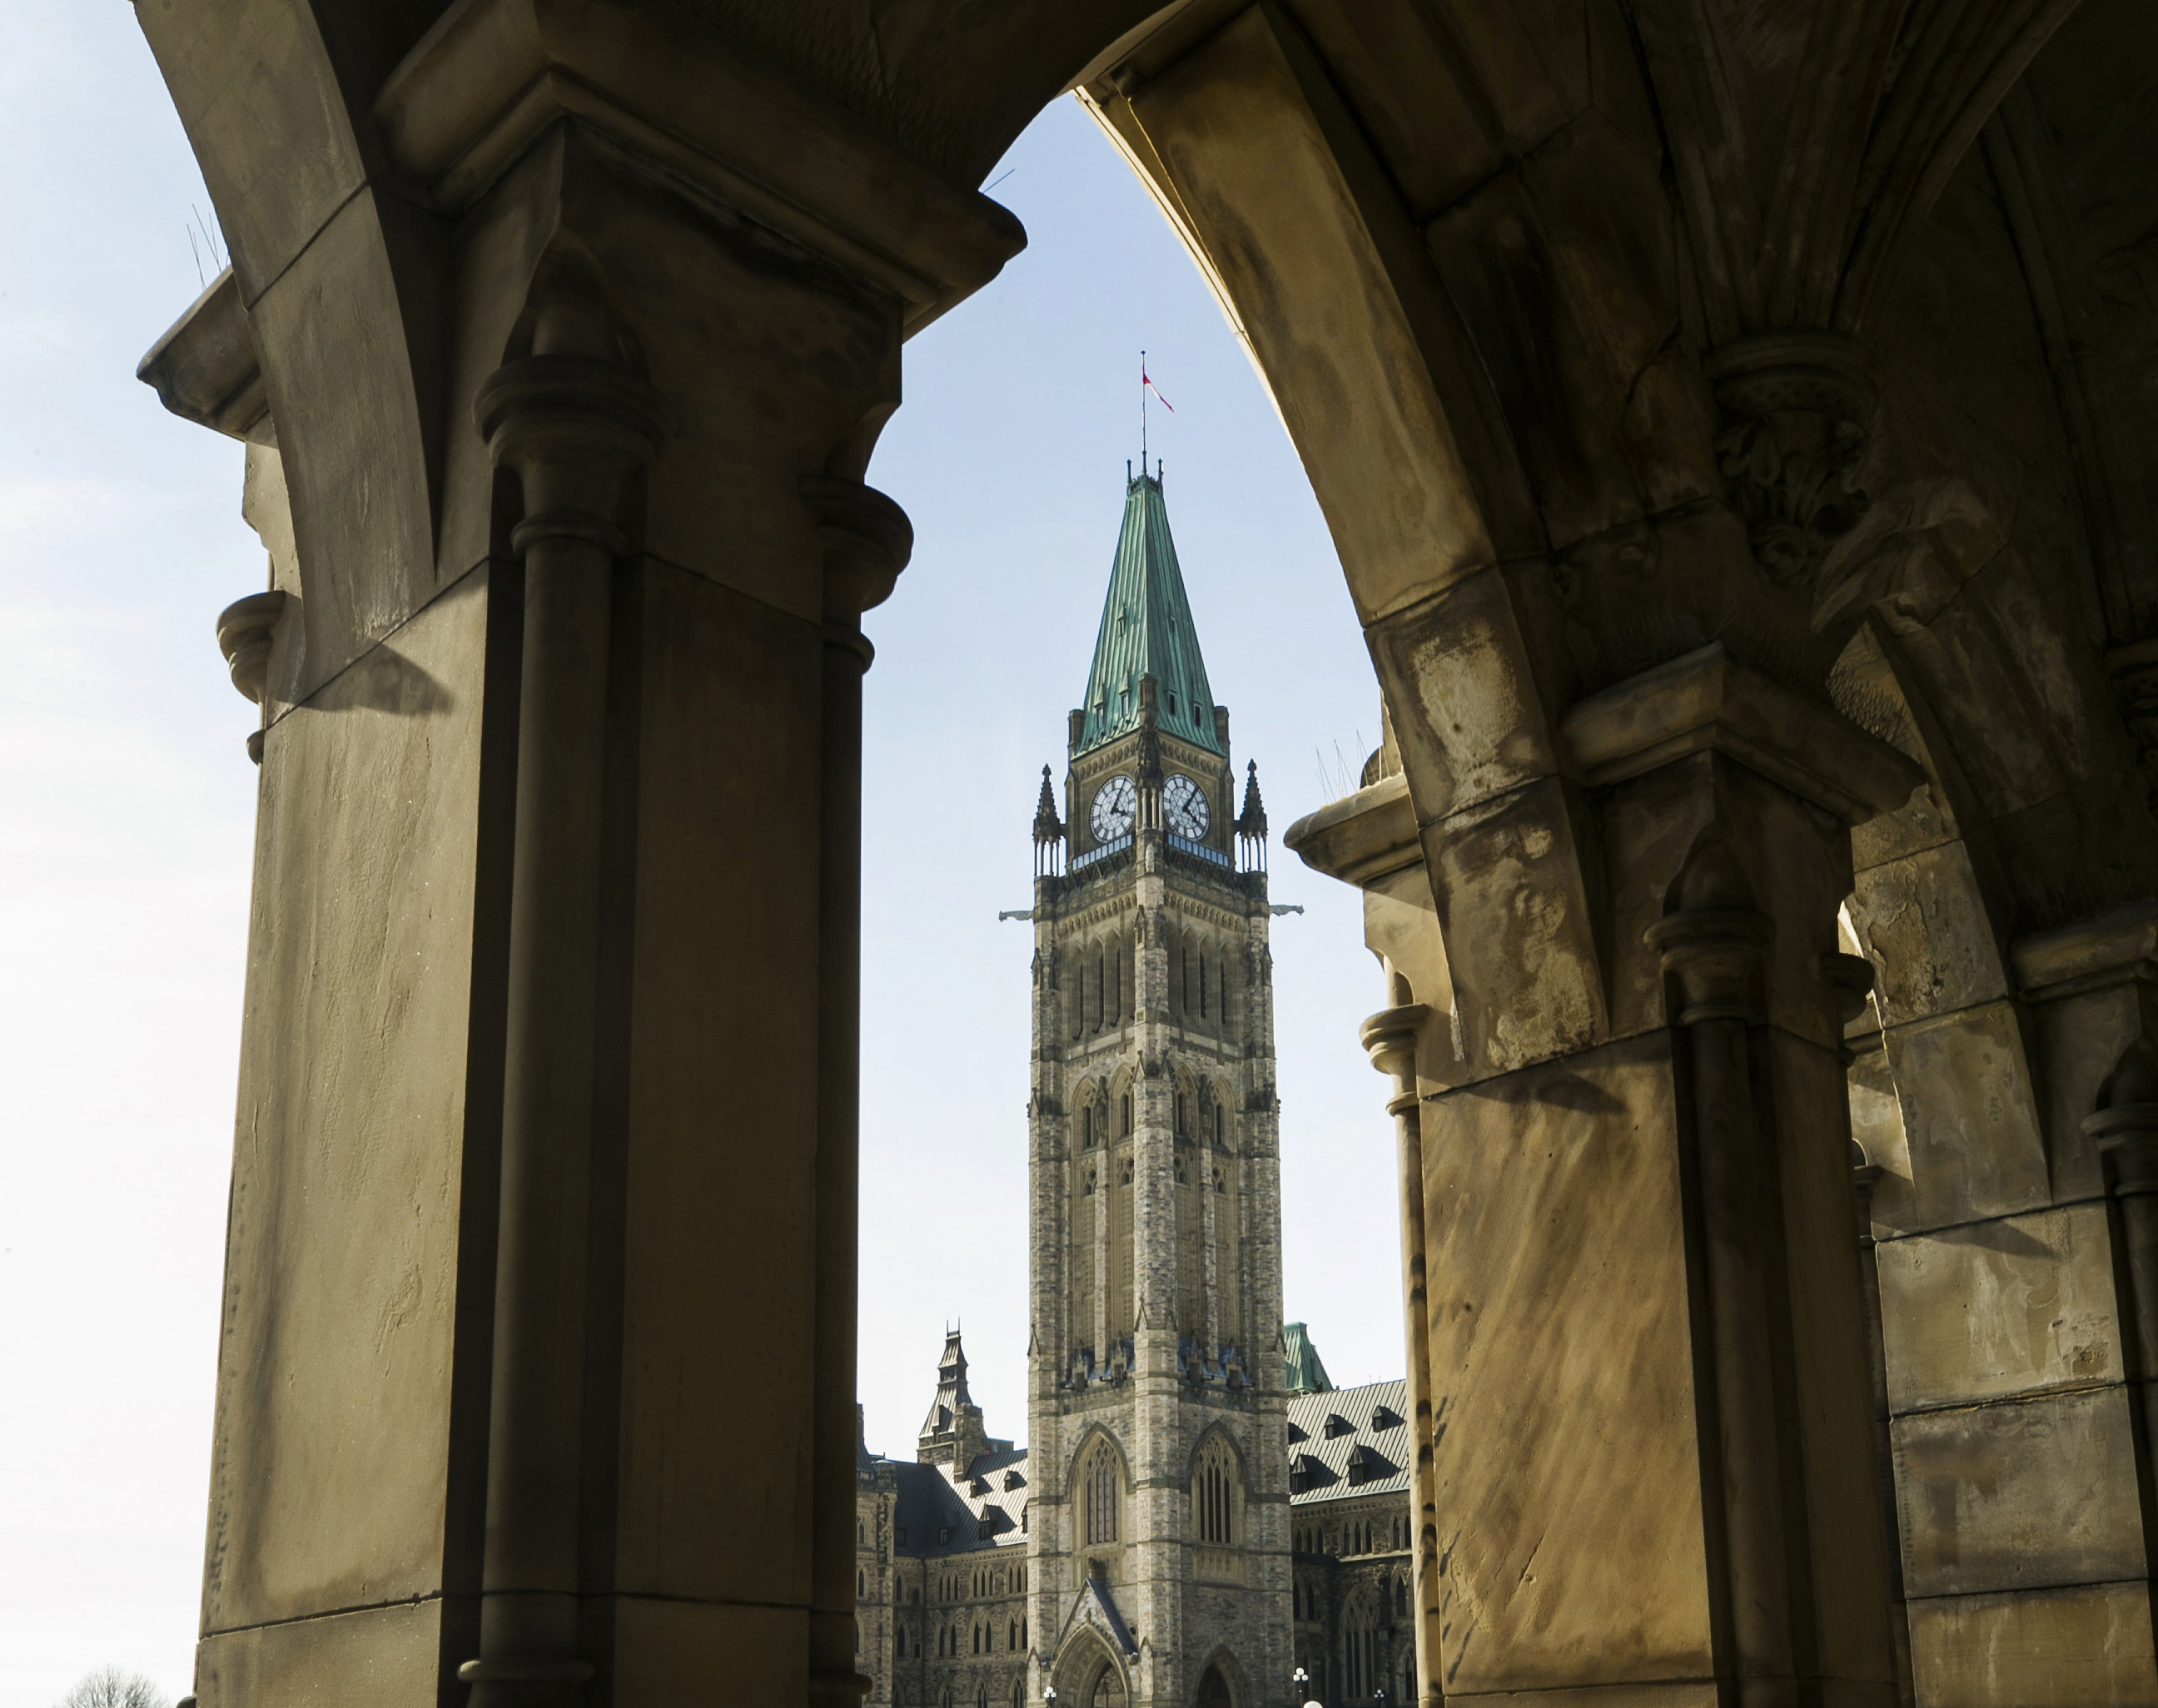 The Peace Tower stands on Parliament Hill in Ottawa, Ontario, Canada.